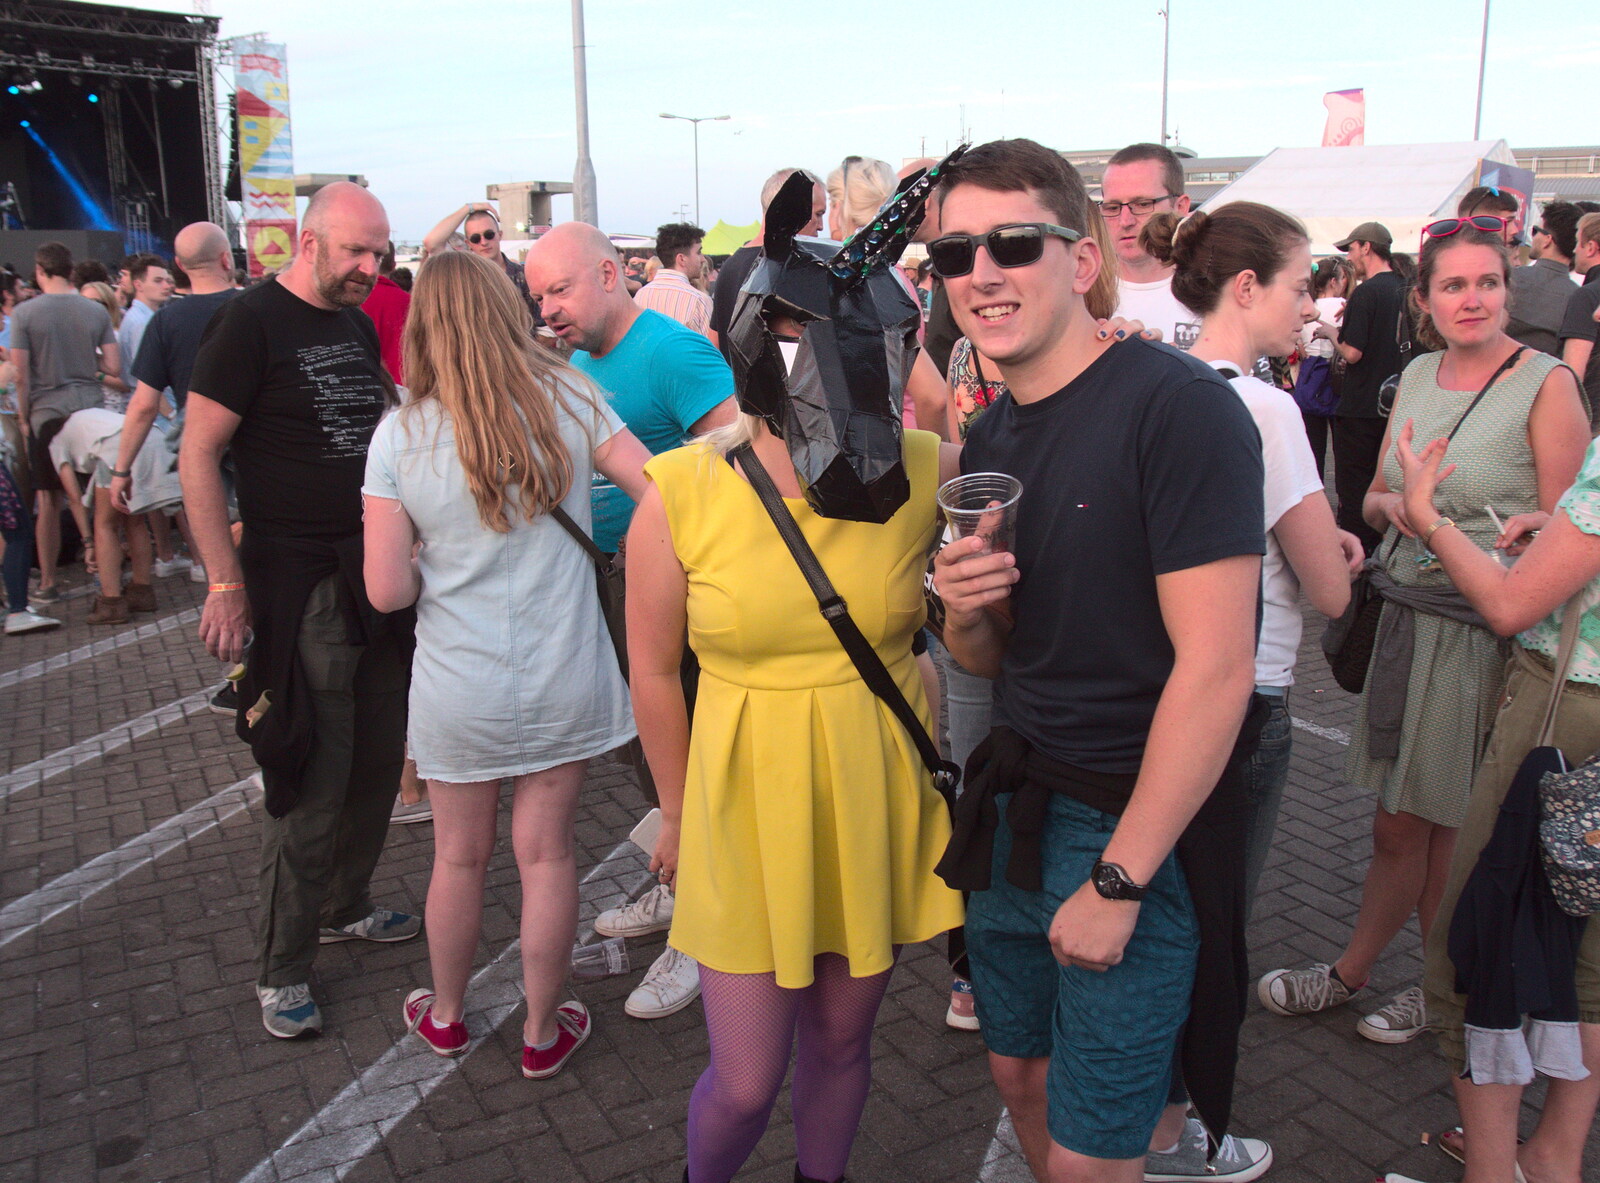 Someone with a black unicorn head on from Beatyard Festival, Dún Laoghaire, County Dublin, Ireland - 5th August 2018